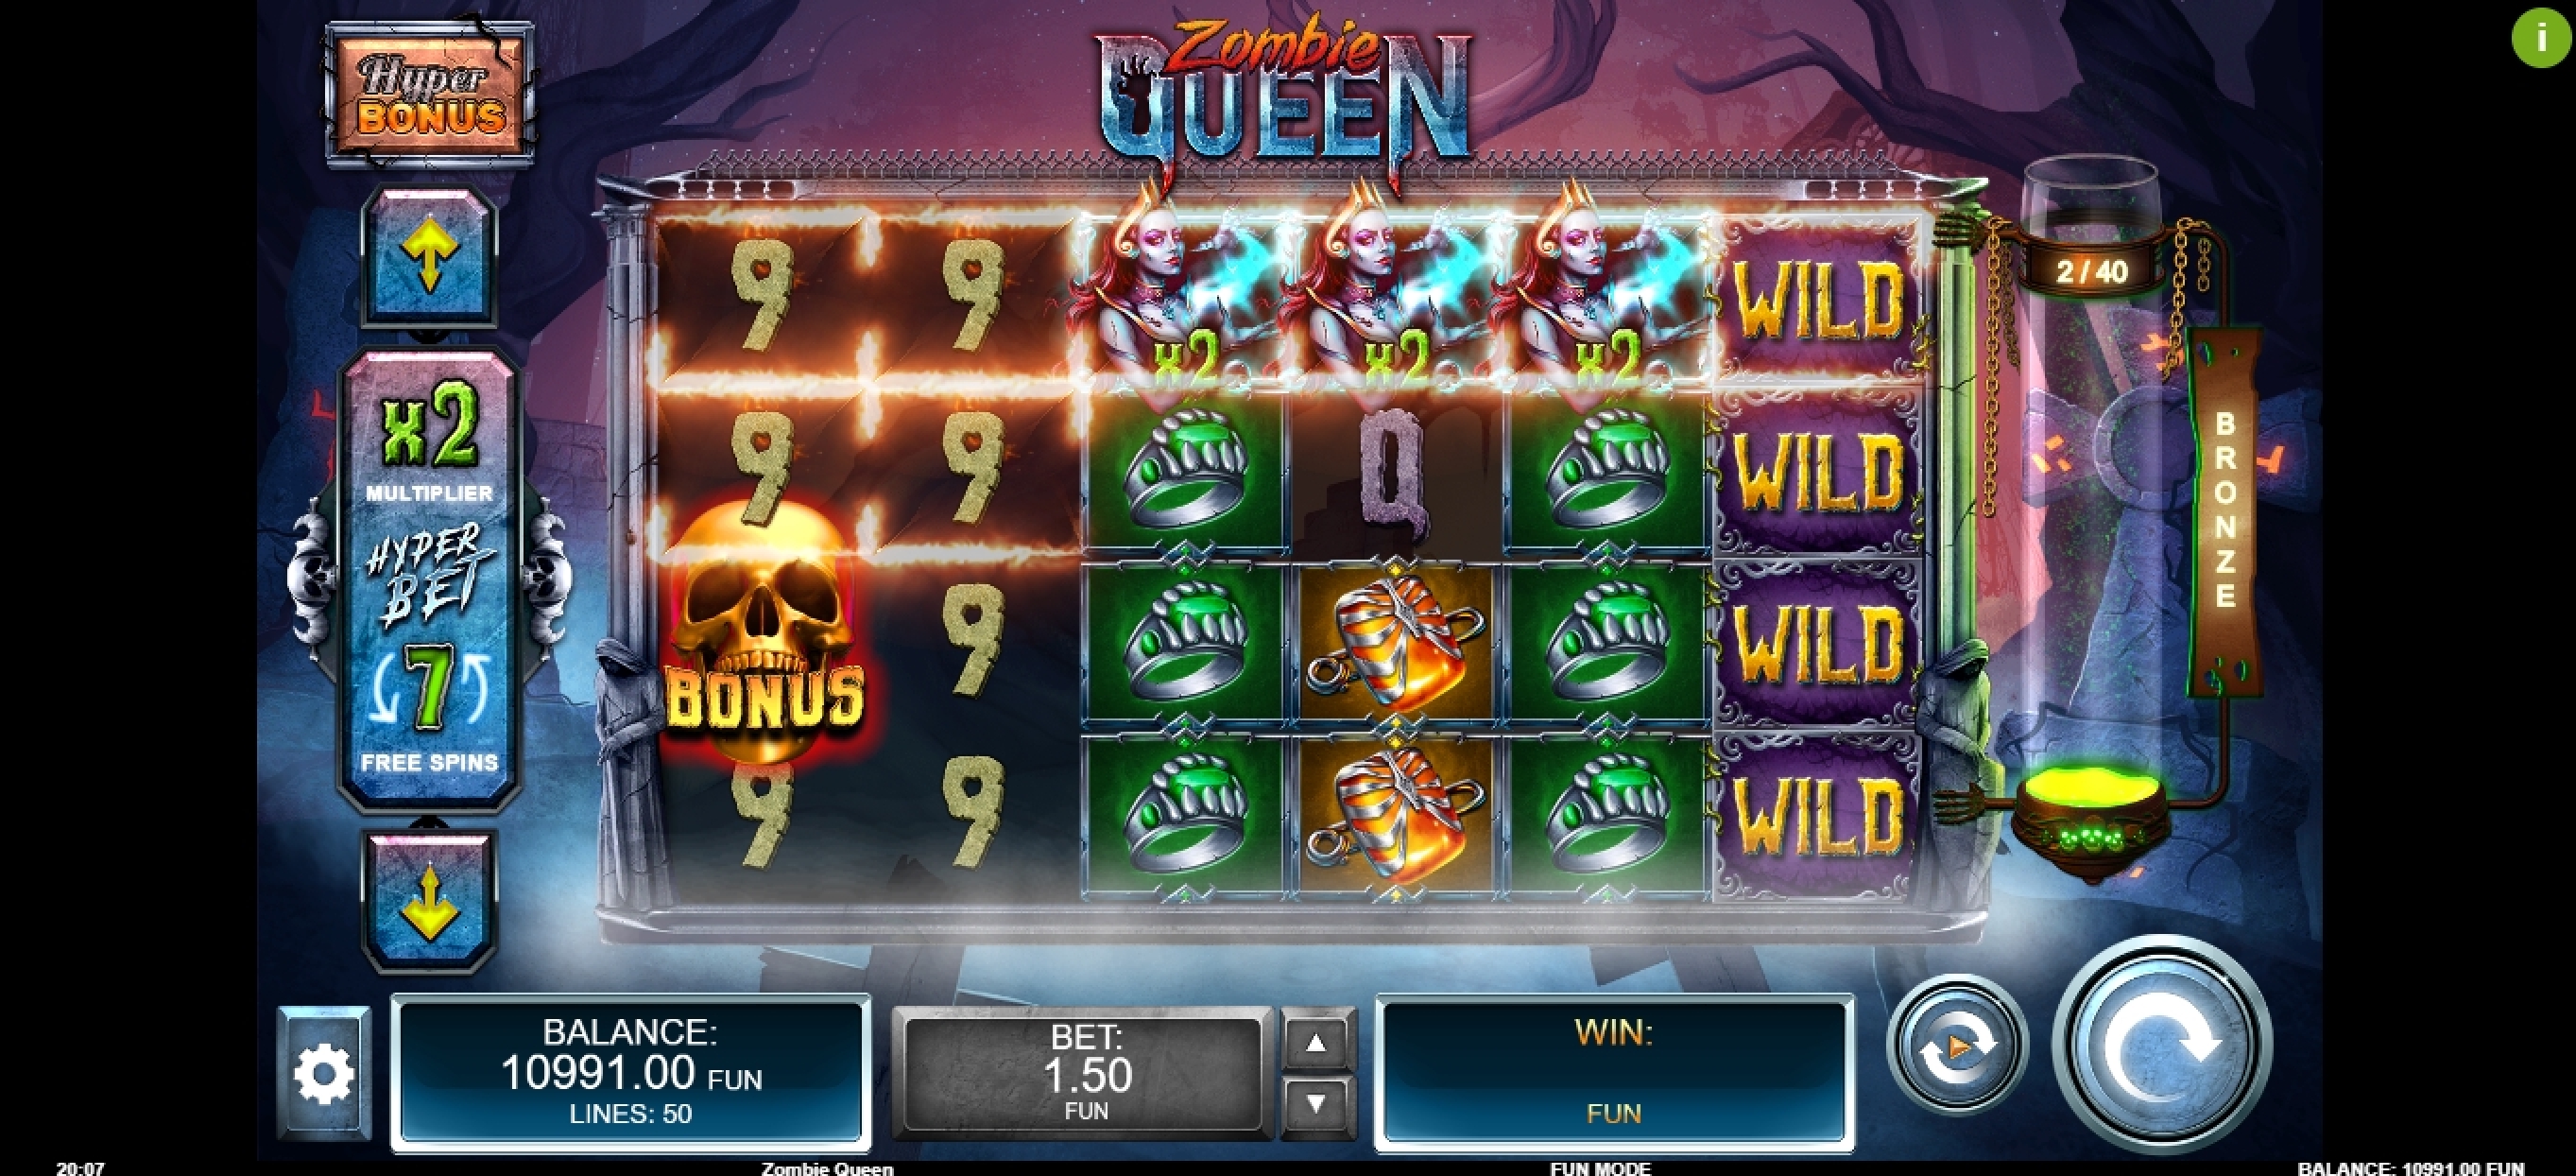 Win Money in Zombie Queen Free Slot Game by Kalamba Games